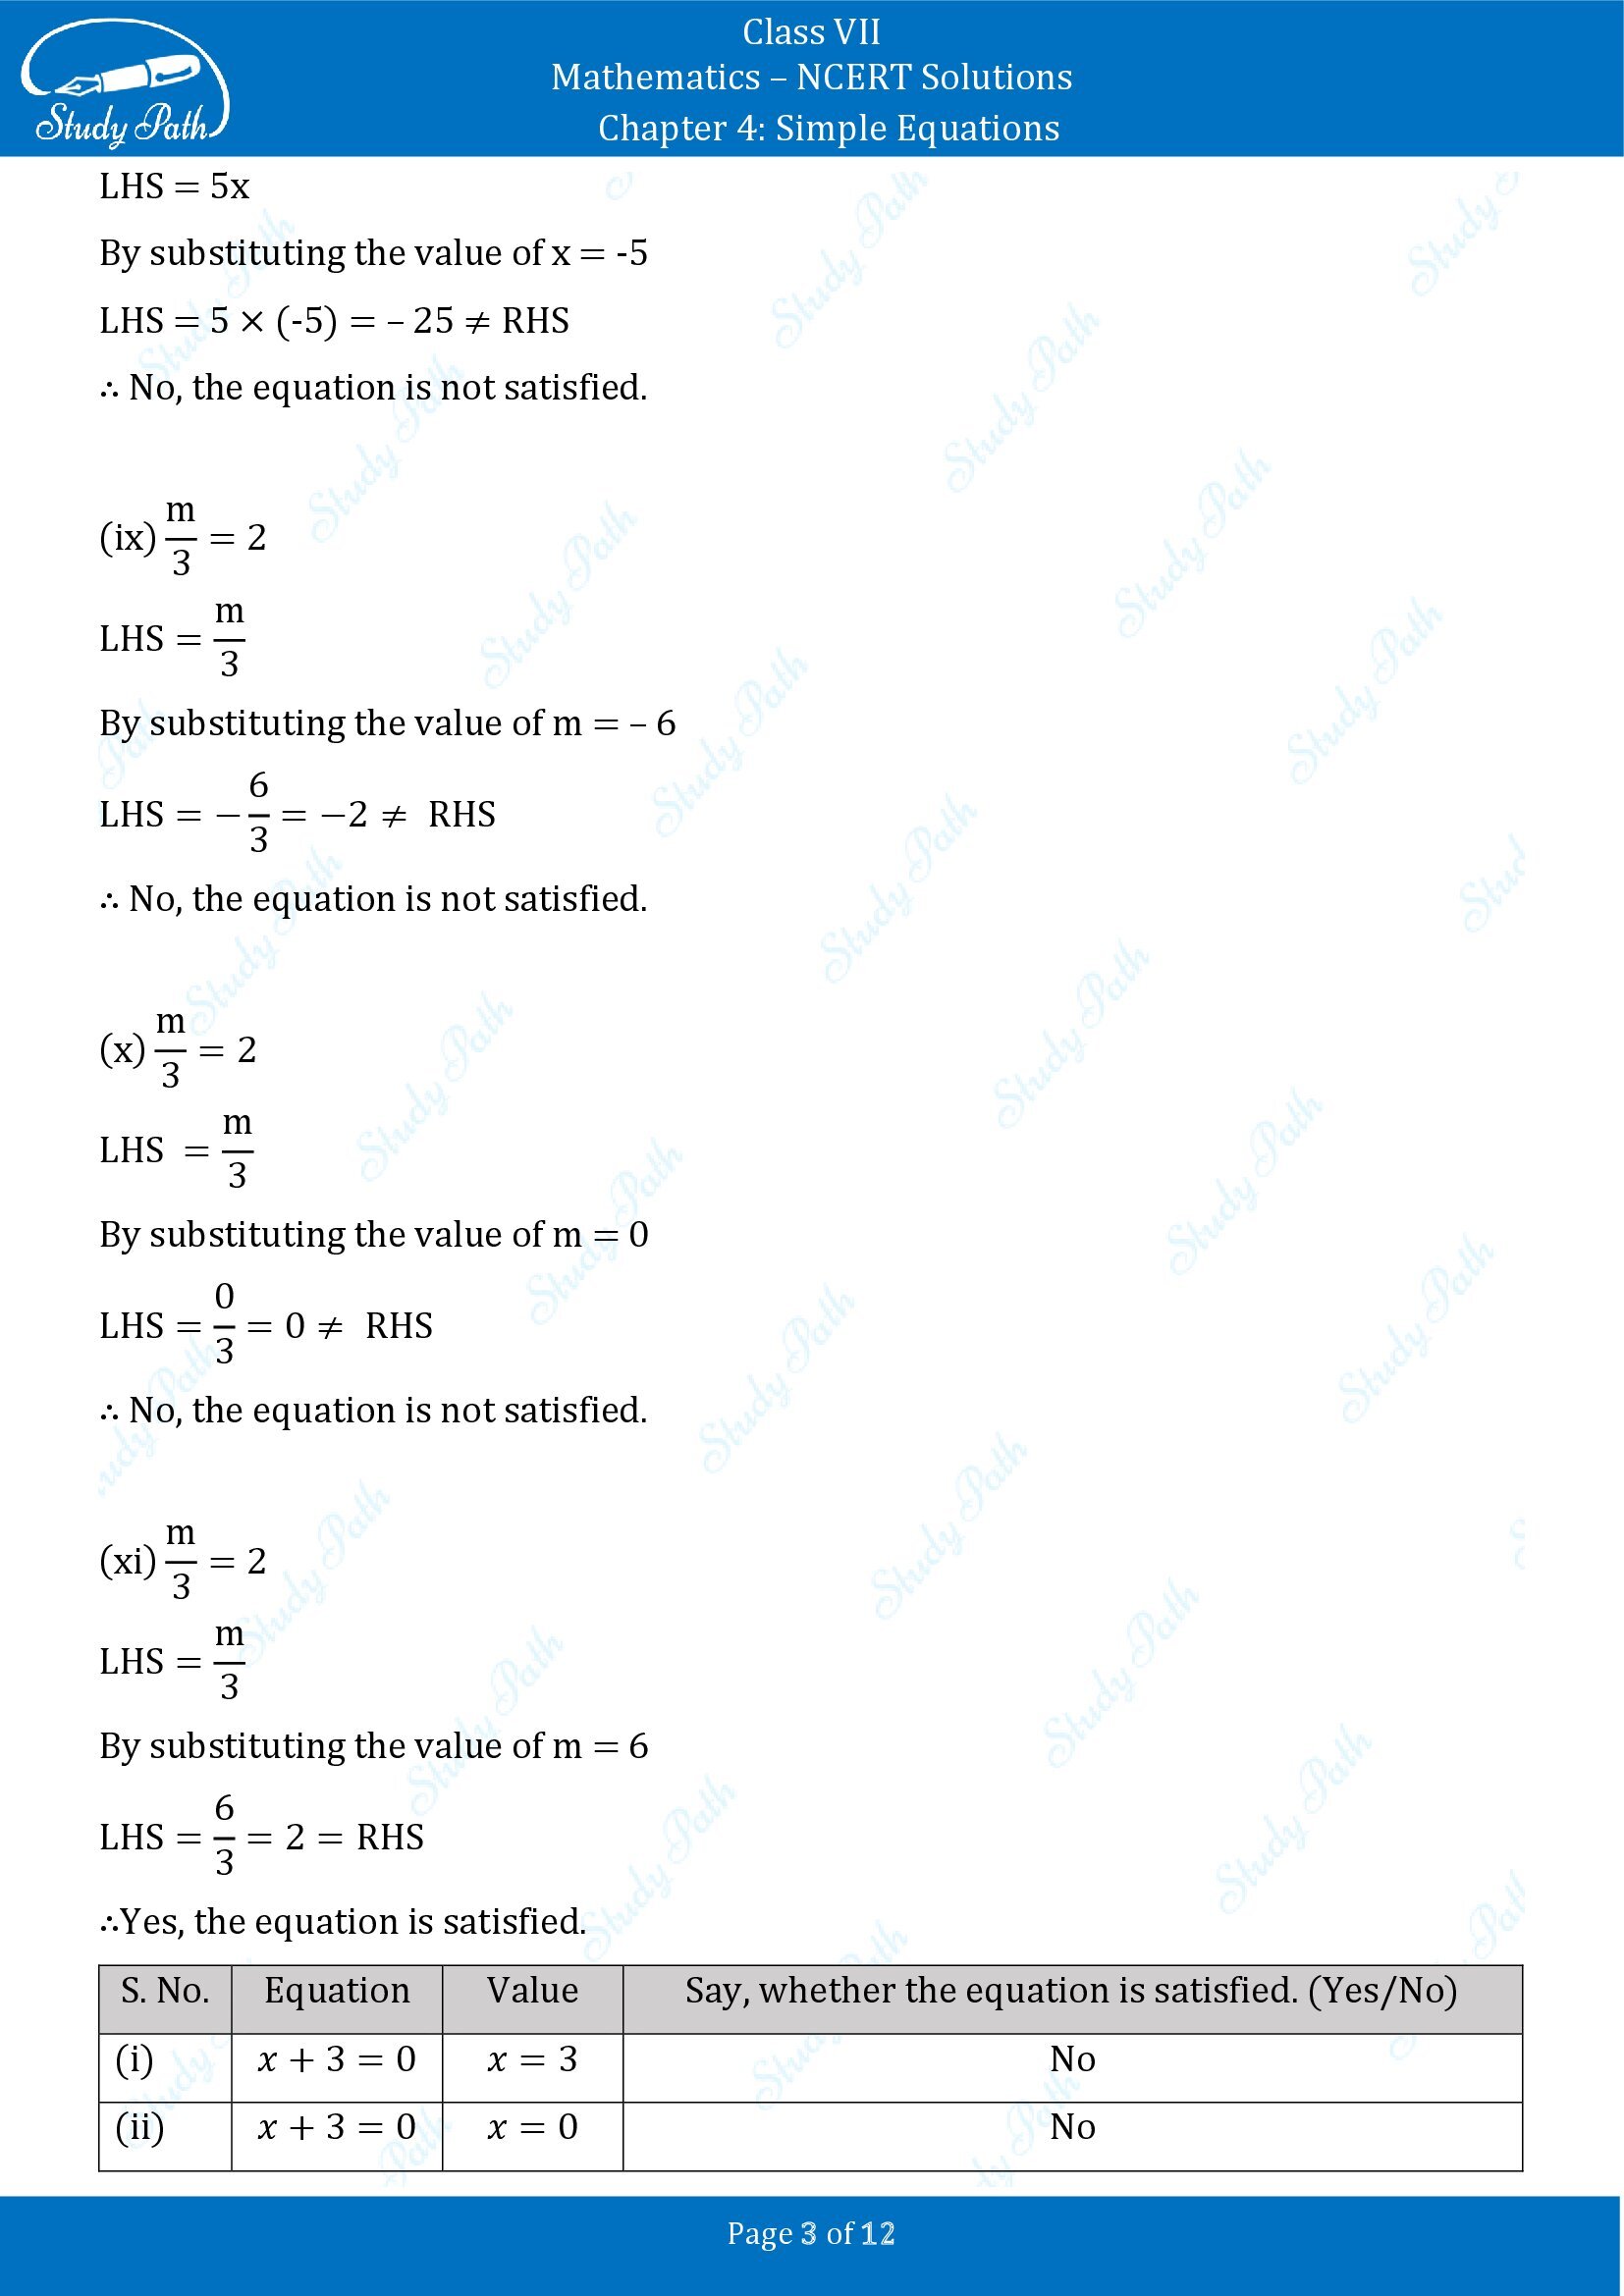 NCERT Solutions for Class 7 Maths Chapter 4 Simple Equations Exercise 4.1 00003